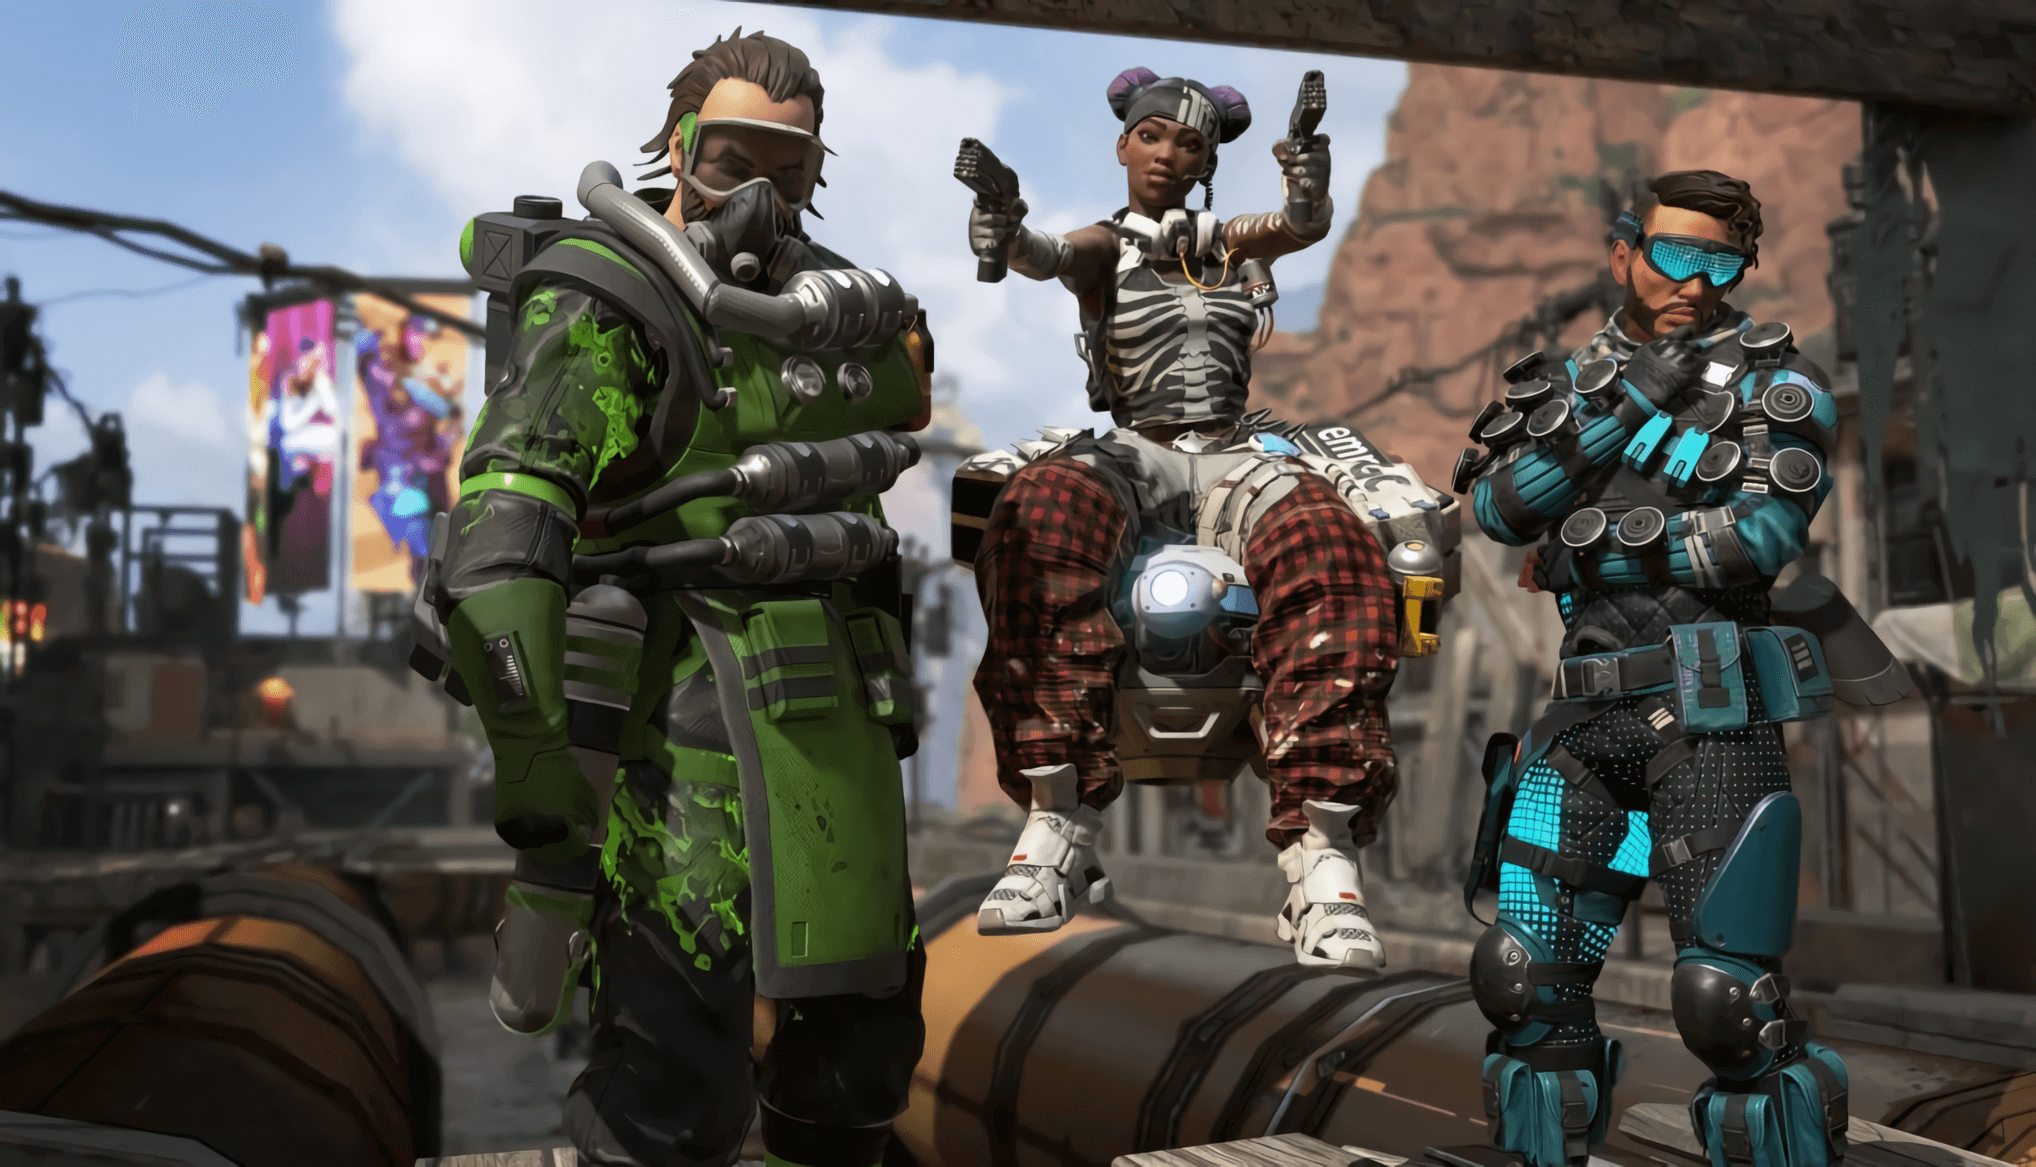 Apex Legends attracts 25 million players in its first week